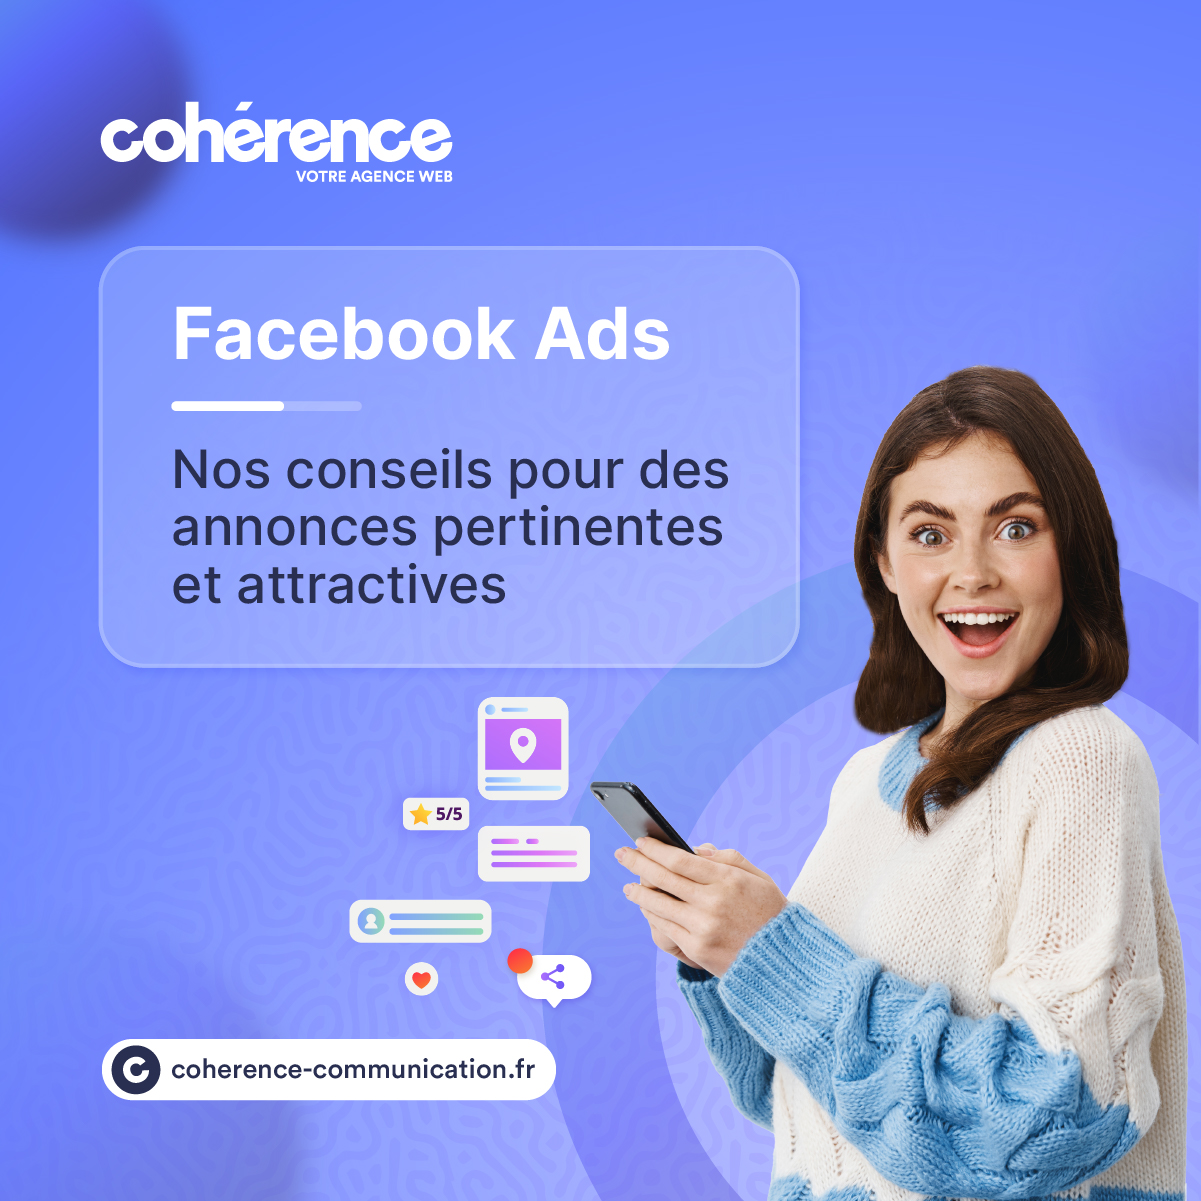 Coherence Agence Digitale Facebook Ads